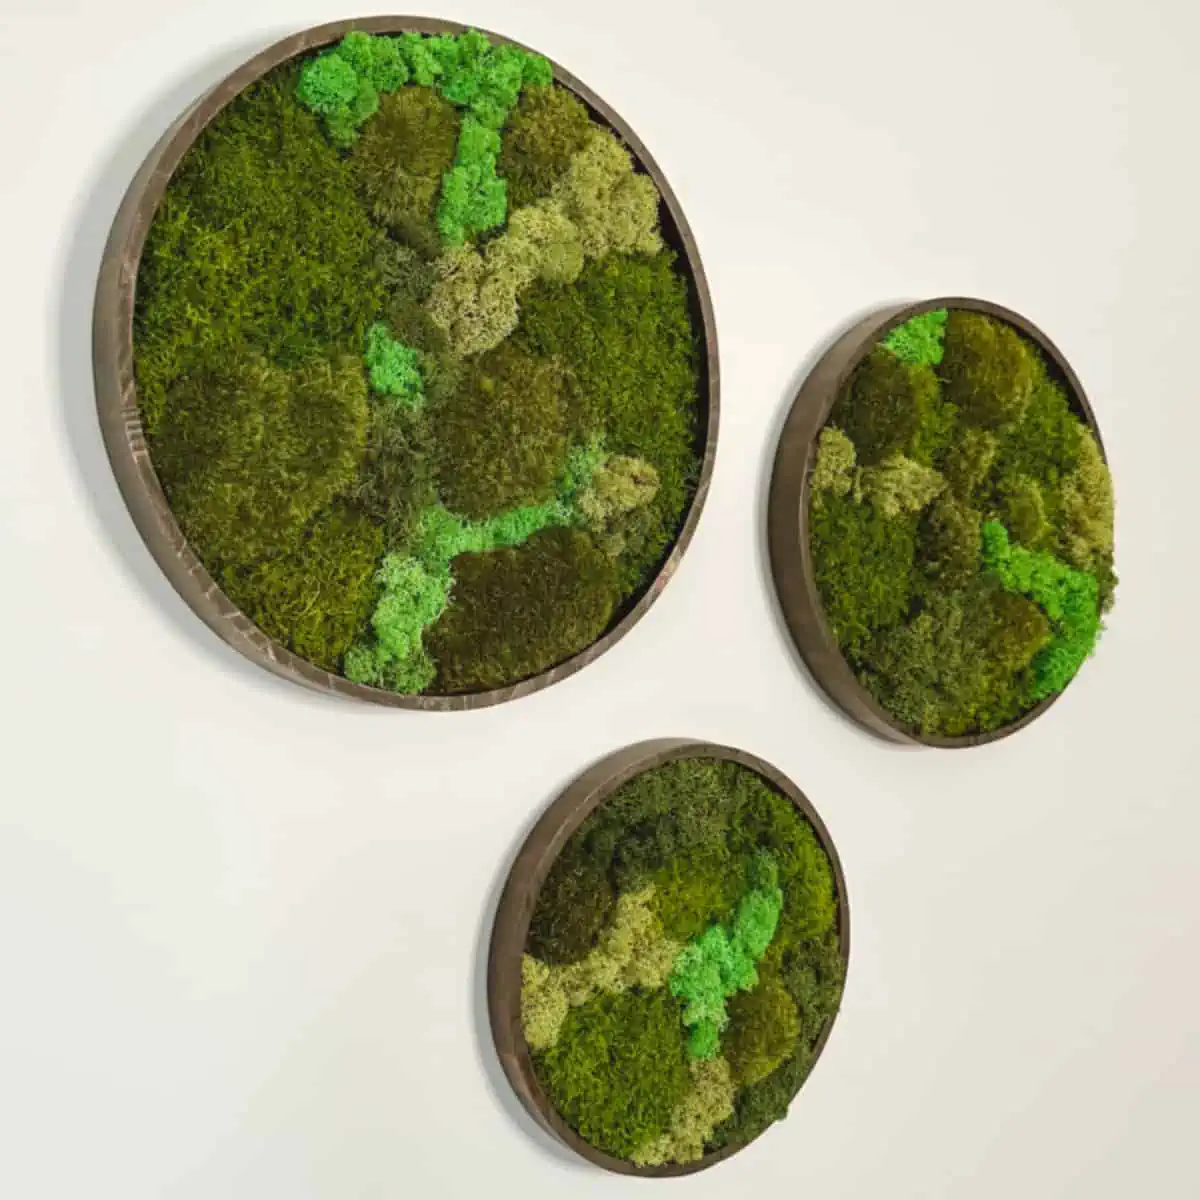 set of 3 different sized round trays with sides. Inside are different colors and textures of preserved mosses in decorative designs.